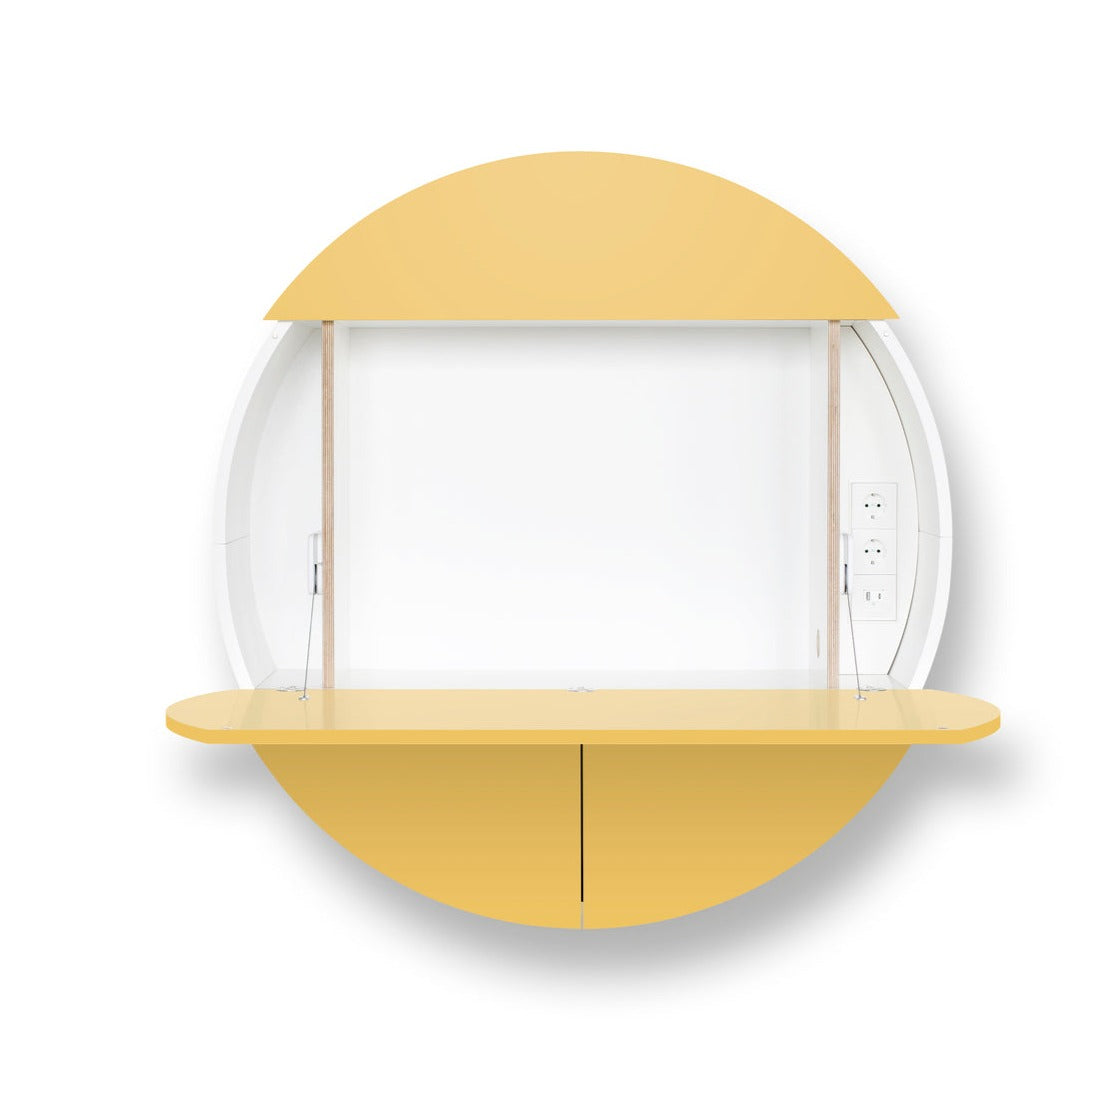 PILL Multifunctional Extra Cabinet-yellow and white-partial opened view